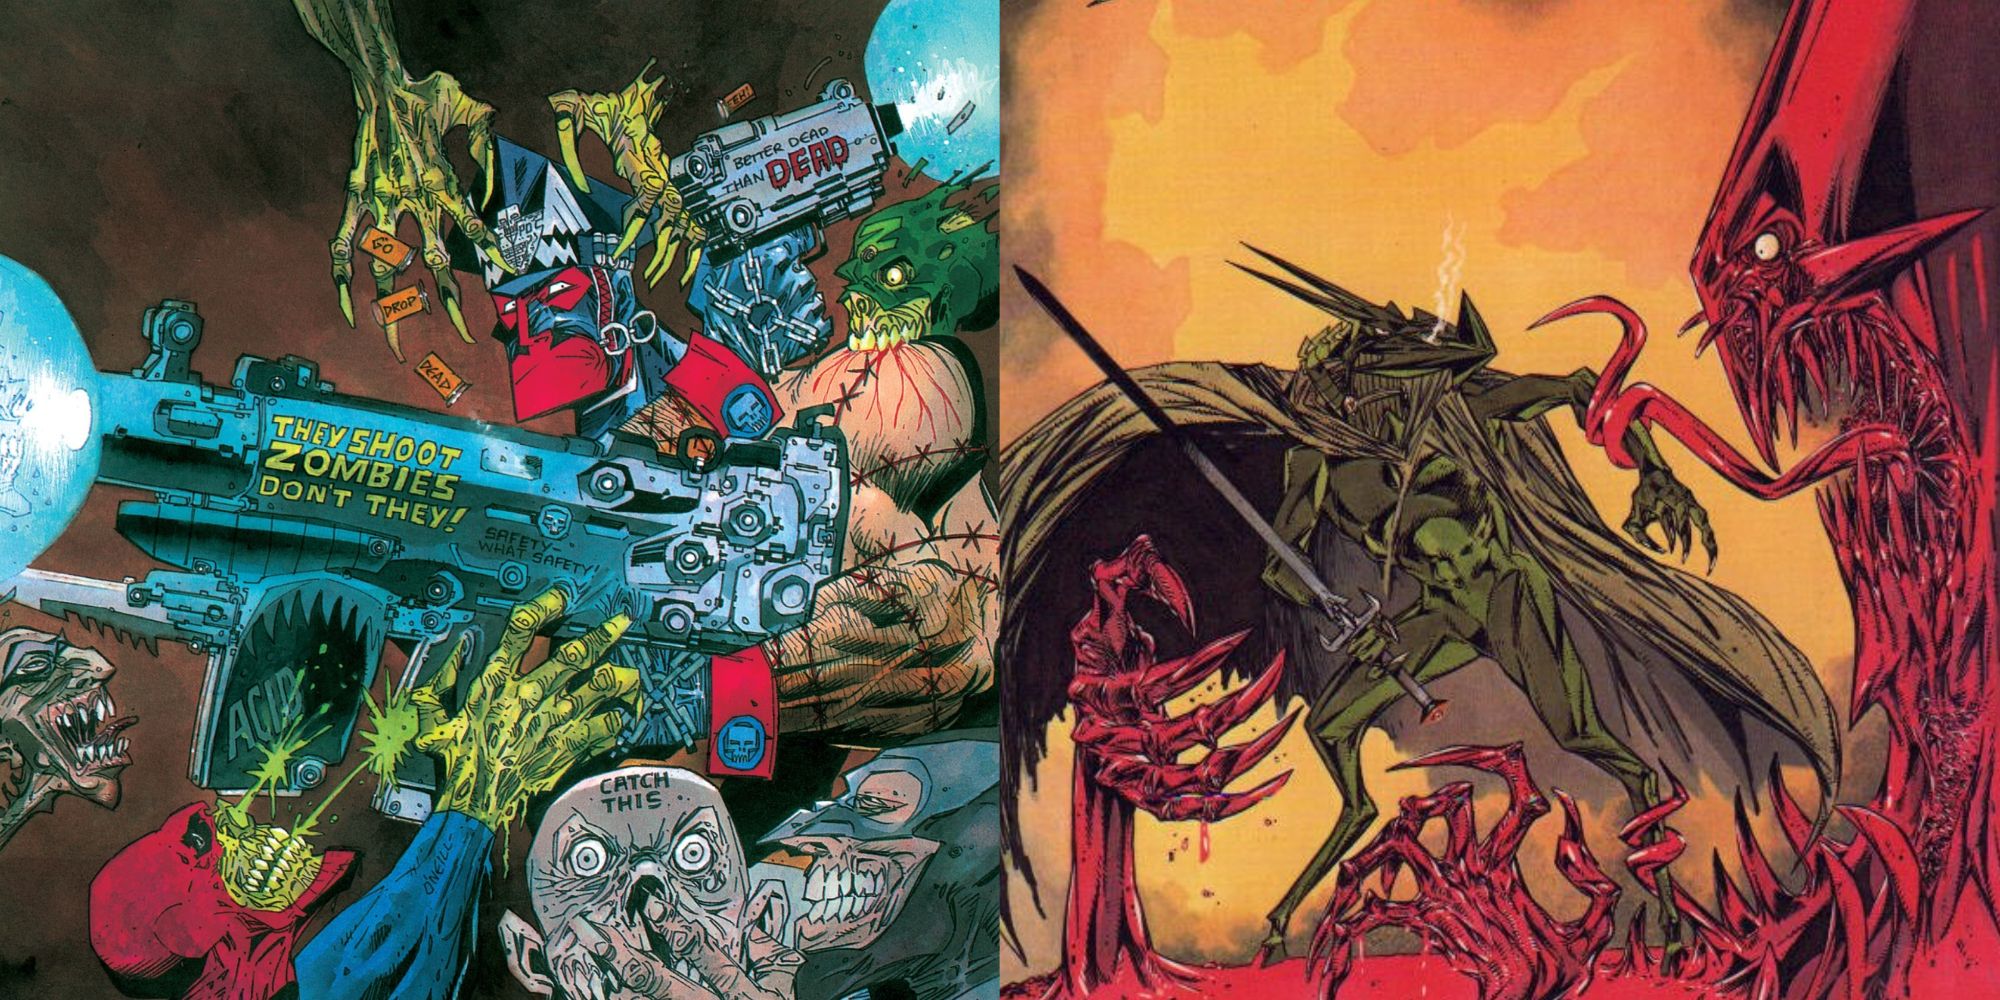 Split image of Marshal Law and Nemesis the Warlock comic book art by Kevin O'Neill.